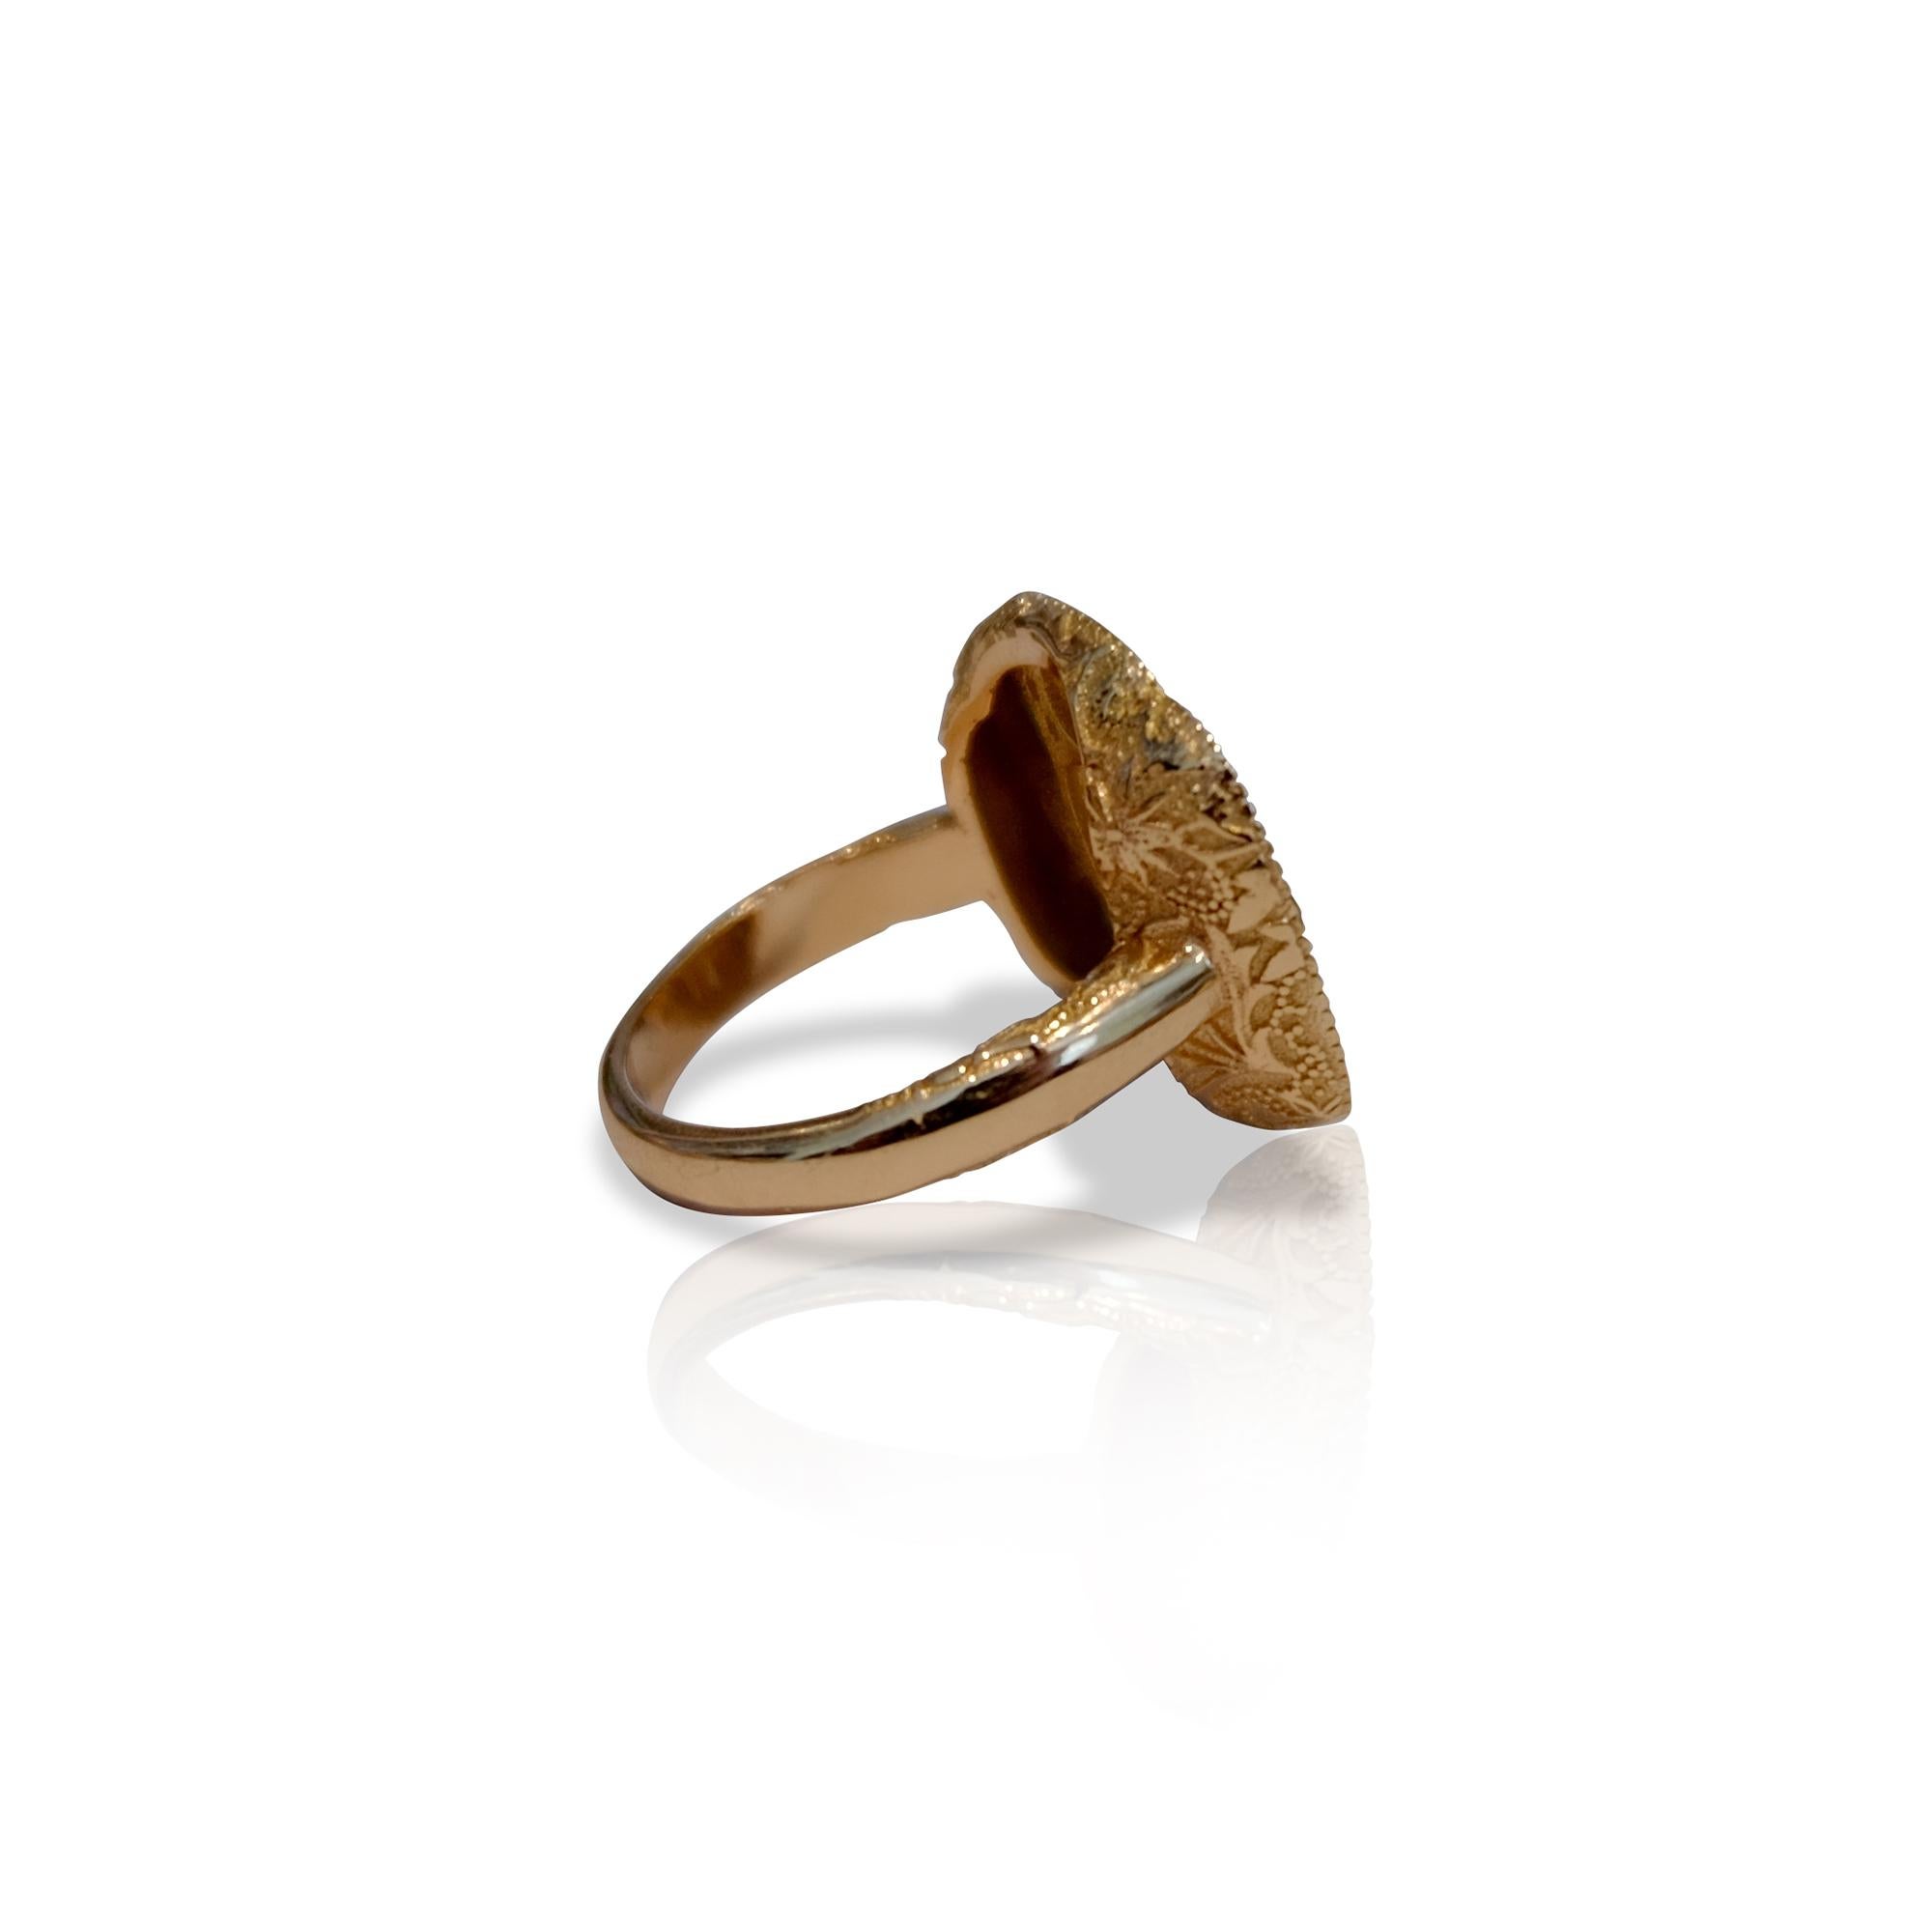 Luca Jouel One of a Kind Rose Gold Rose Cut Diamond Cocktail Ring In New Condition For Sale In South Perth, AU